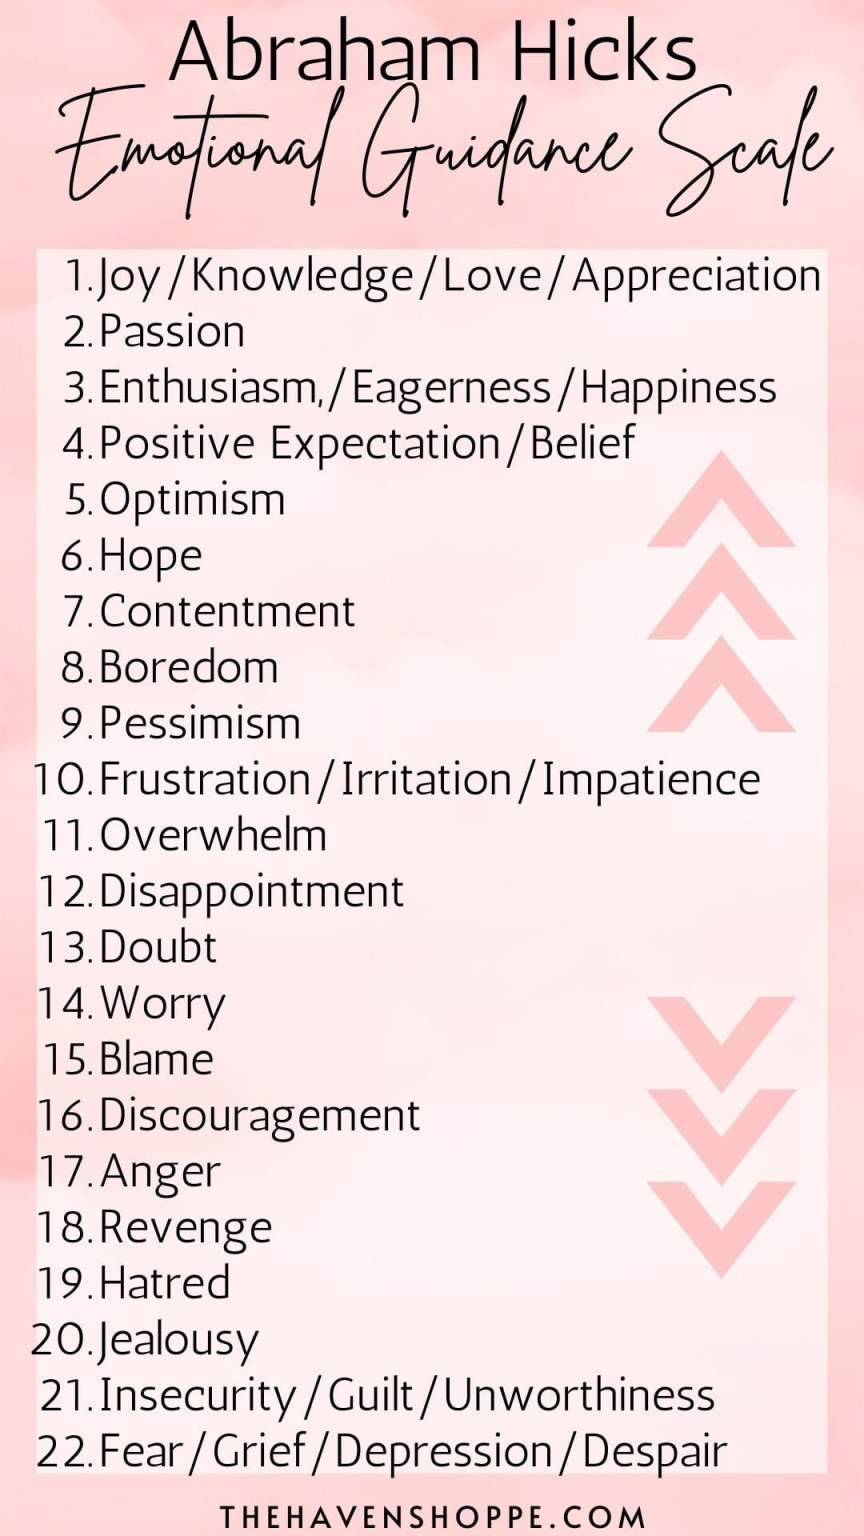 How To Use Abraham Hicks Emotional Guidance Scale